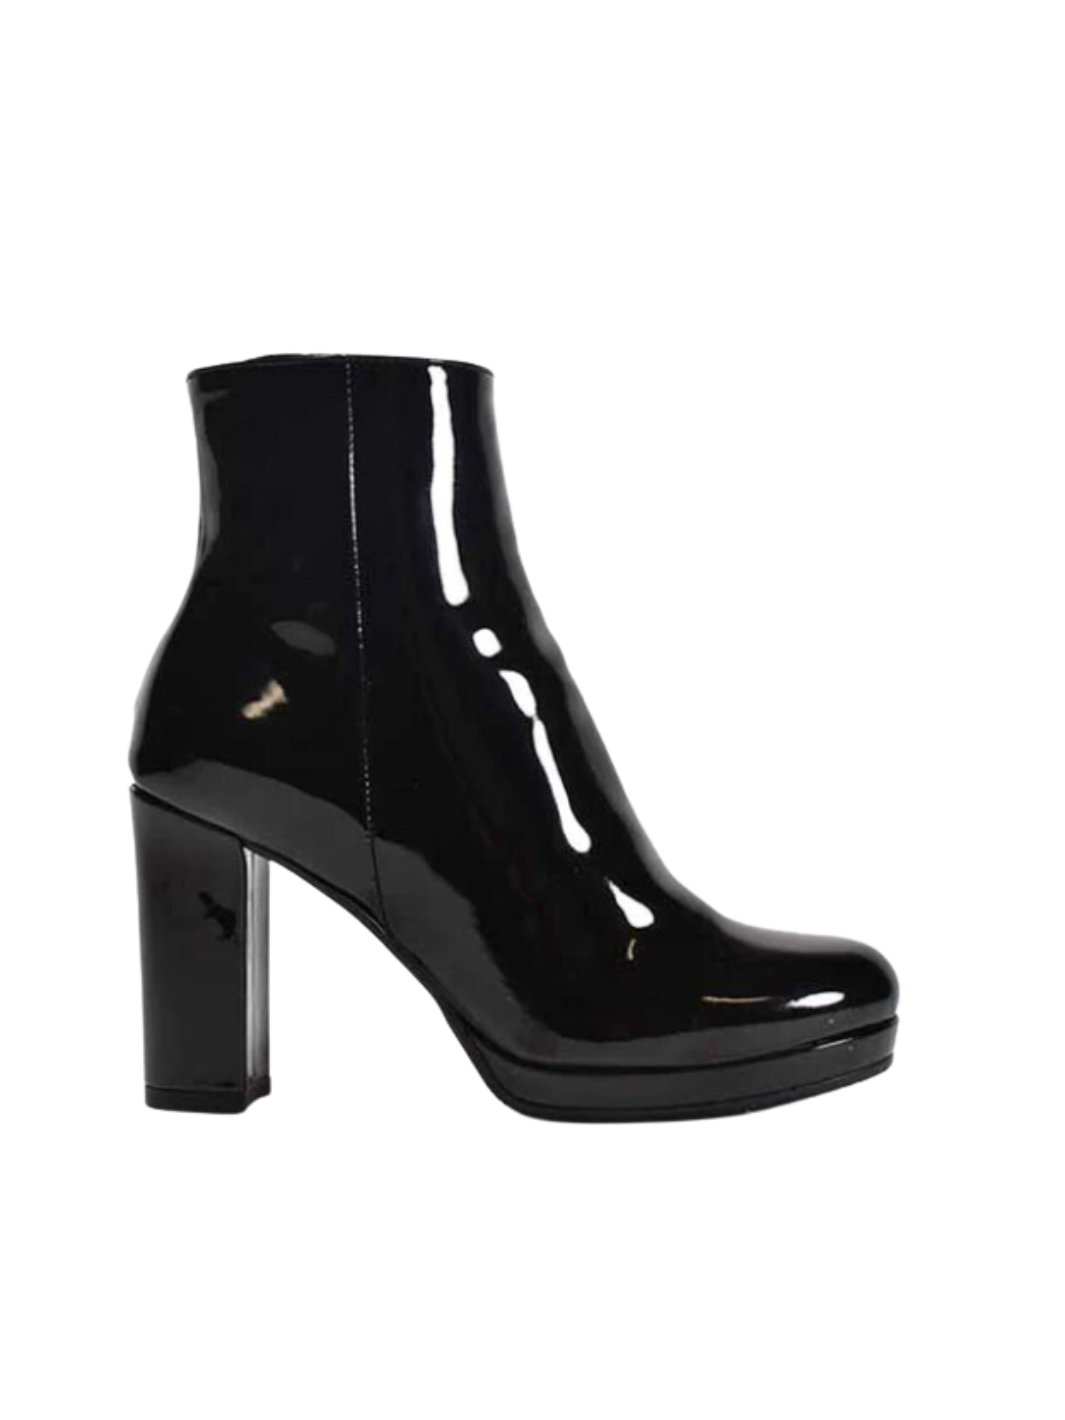 NICKIE ANKLE BOOT IN BLACK PATENT LEATHER - Romi Boutique